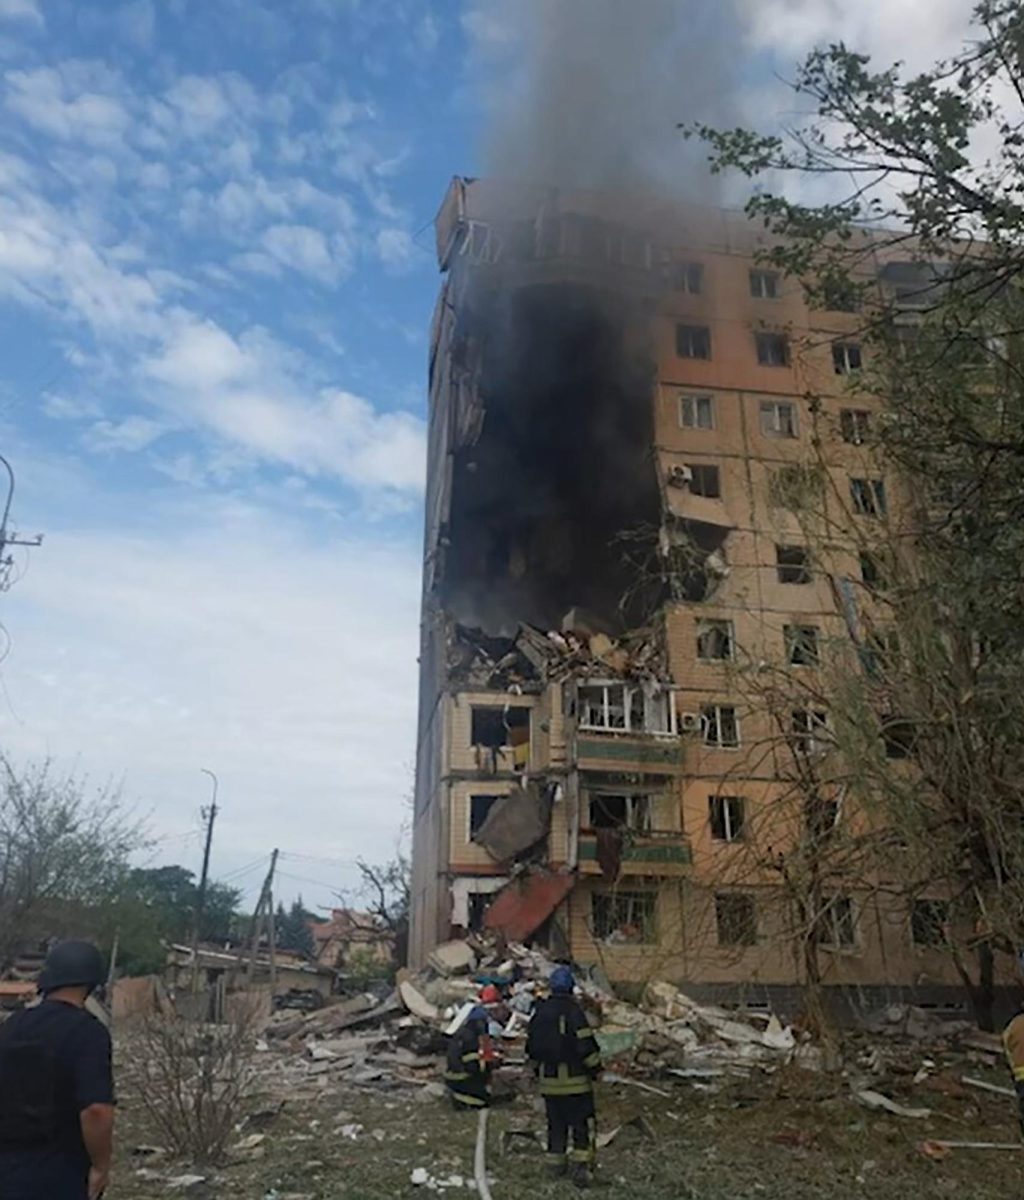 Residents view damage from a Russian missile attack on the city of Kryvyi Rih, Ukraine, on July 31, 2023. (Cover Images via Zuma Press/TNS) 